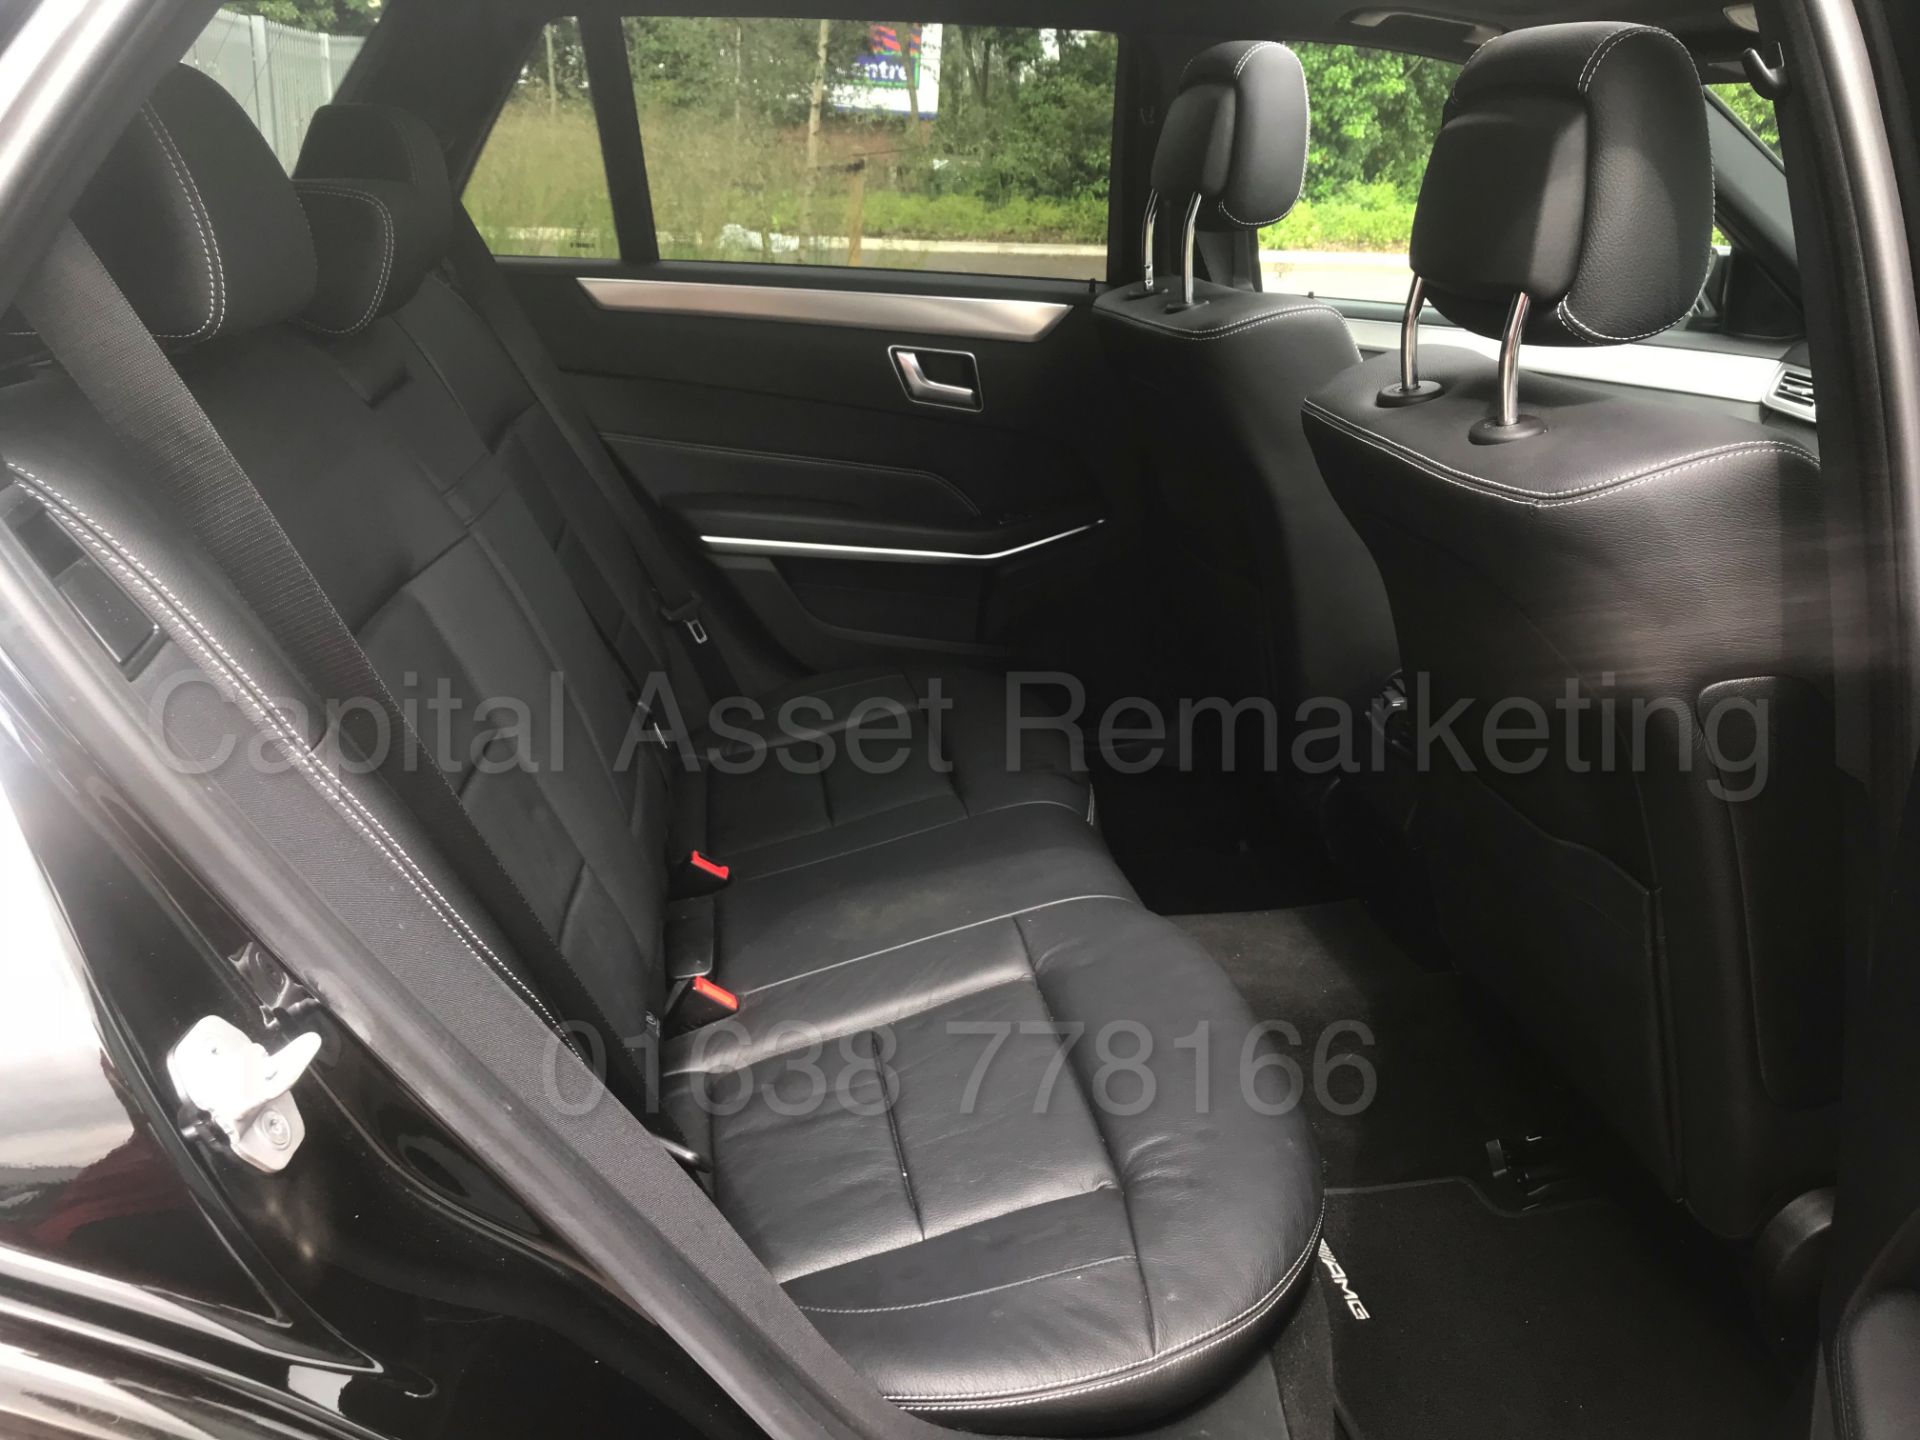 (On Sale)MERCEDES-BENZ E220D 'AMG NIGHT EDITION - PREMIUM' (2016) 'AUTO' - LEATHER - NAV - PAN ROOF* - Image 30 of 50